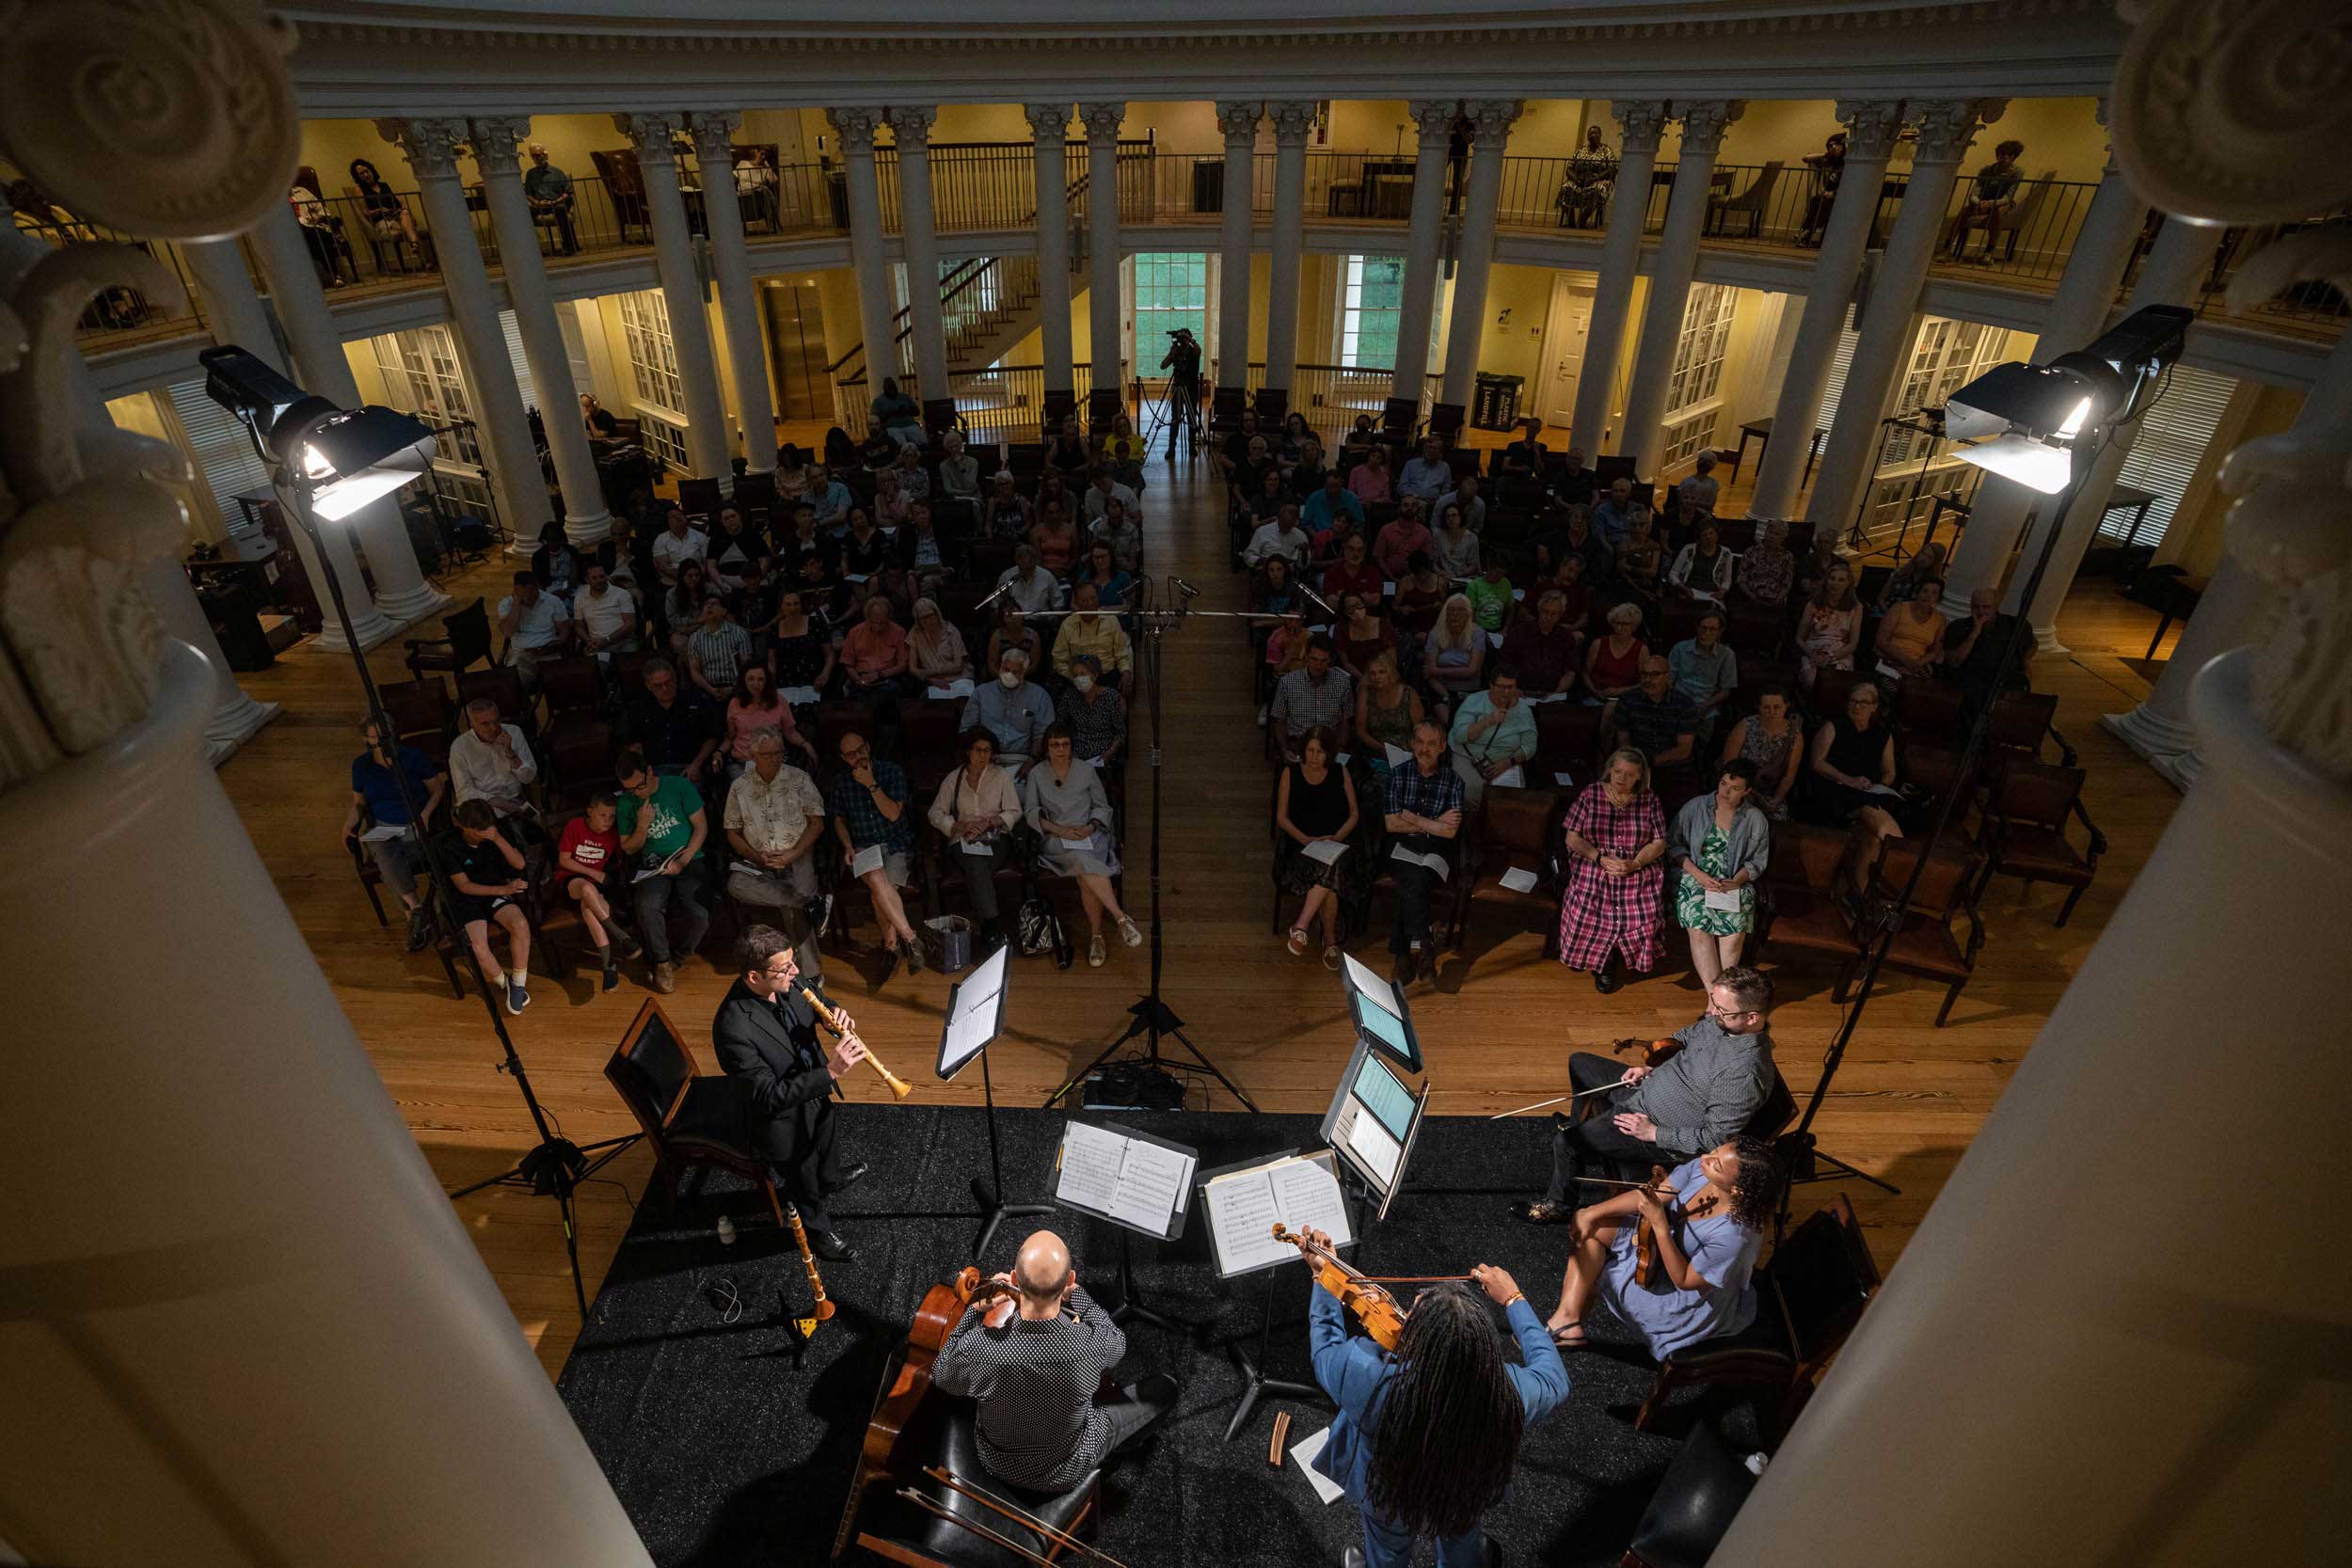 A view from above and behind the musicians facing the crowd in the Dome Room